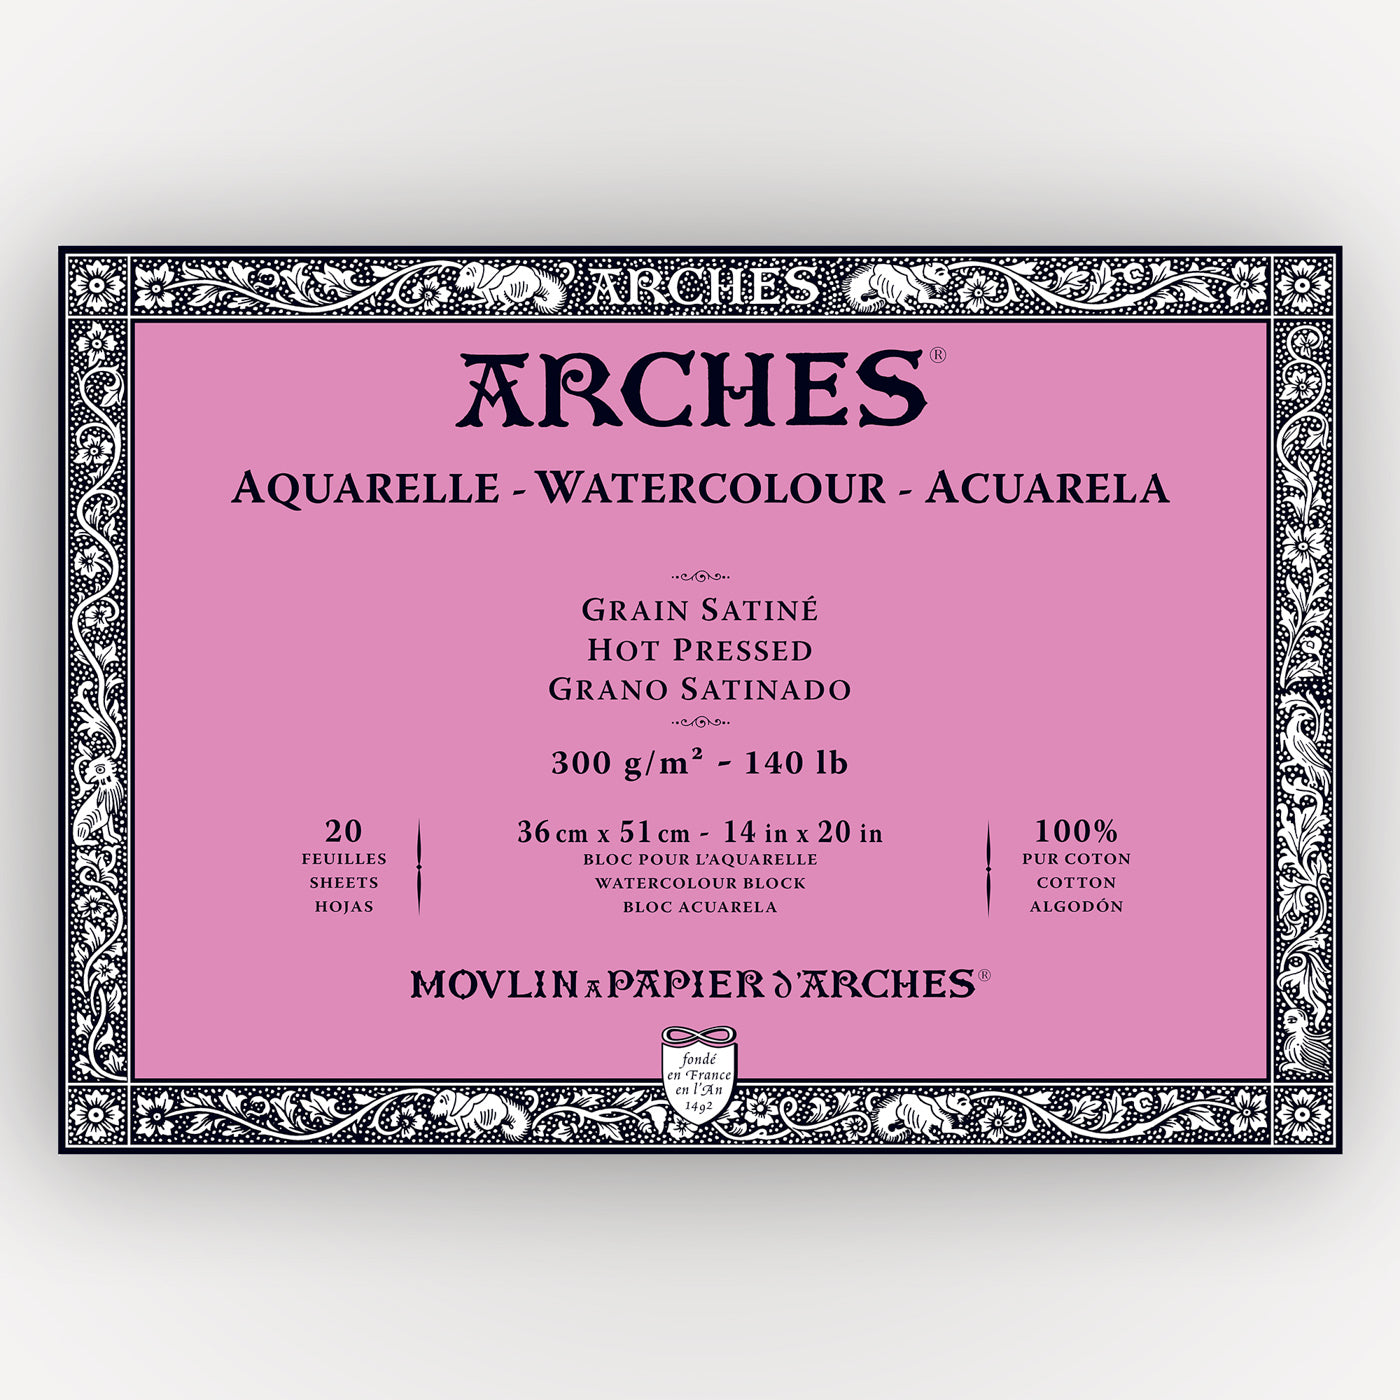 Arches Hot Pressed 300g 36x51cm 20 sheets